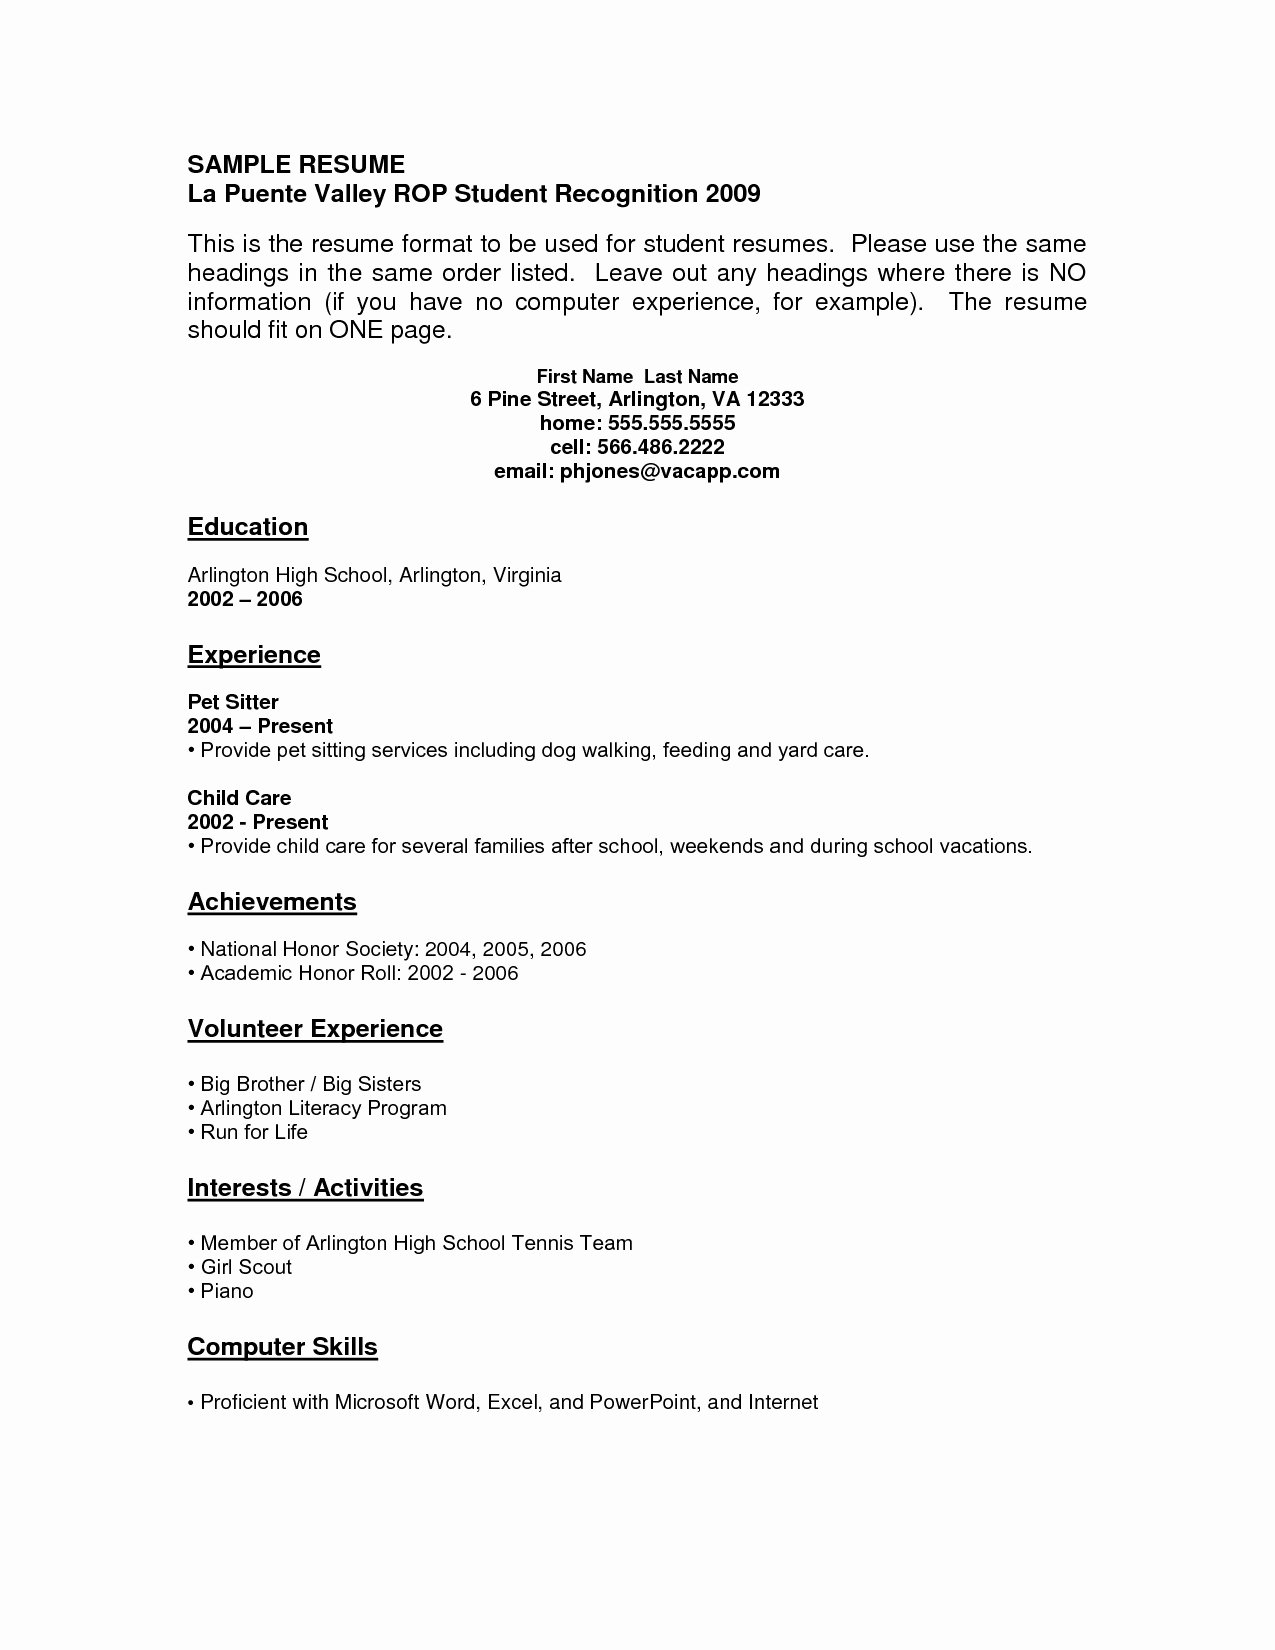 Resume for Highschool Students with No Experience Work